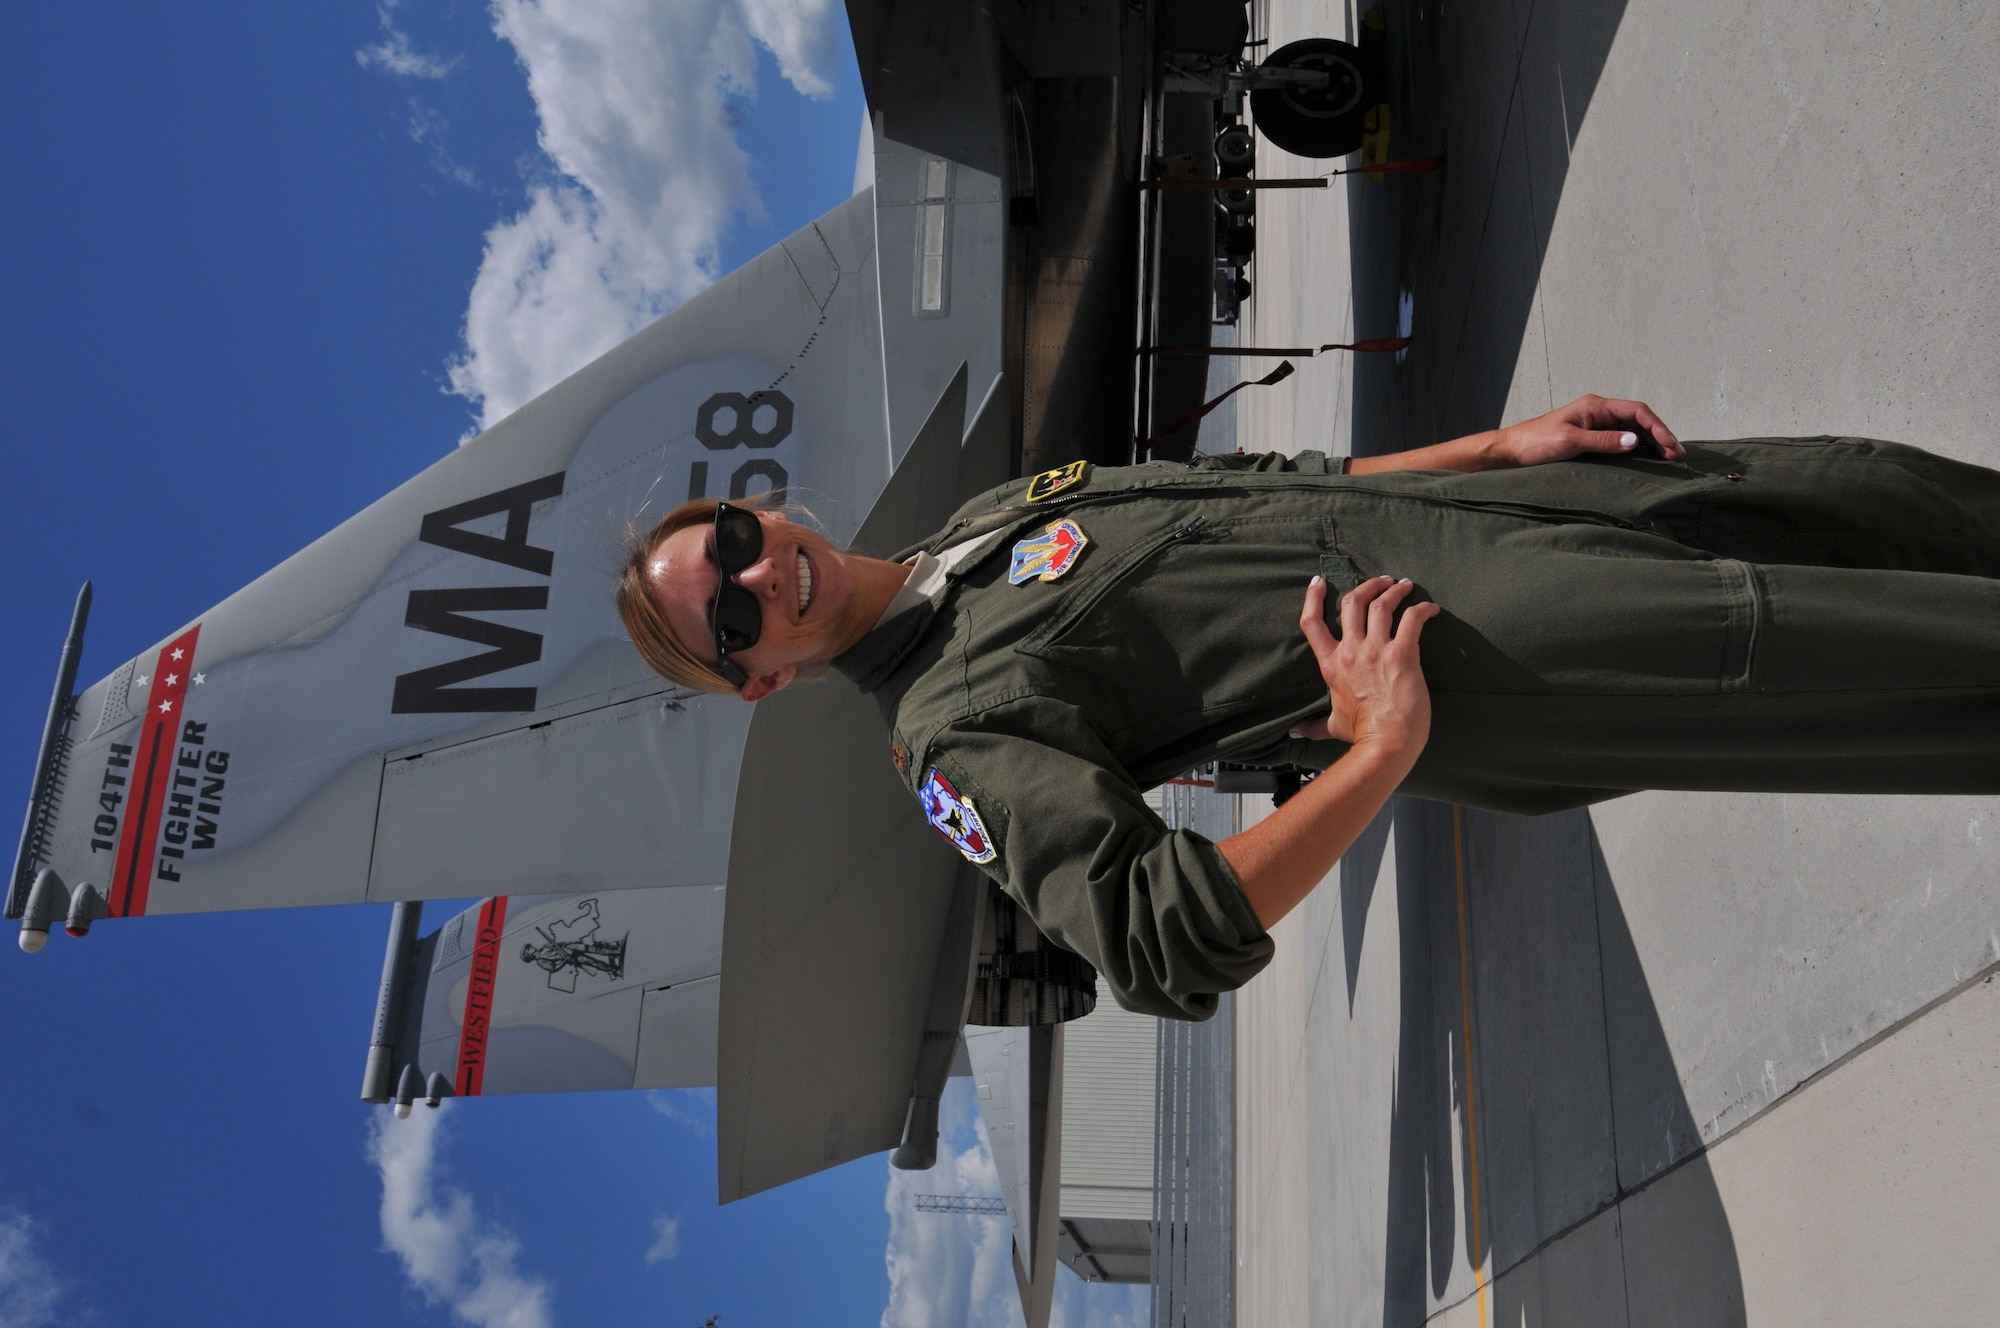 Maj. Ashley Rolfe is the first female fighter pilot for the Air National Guard’s 104th Fighter Wing. Rolfe is an Air Force Academy graduate and combat veteran who has served in the Air Force for eleven years. Rolfe became an Air Force pilot after growing up as an Air Force “Brat” dependent, following her dad and grandad’s footsteps carrying on the family legacy. Rolfe’s swearing in ceremony took place at Barnes Air National Guard Base, July 26, 2016. (U.S. Air National Guard Photo by Master Sgt. Julie Avey)  